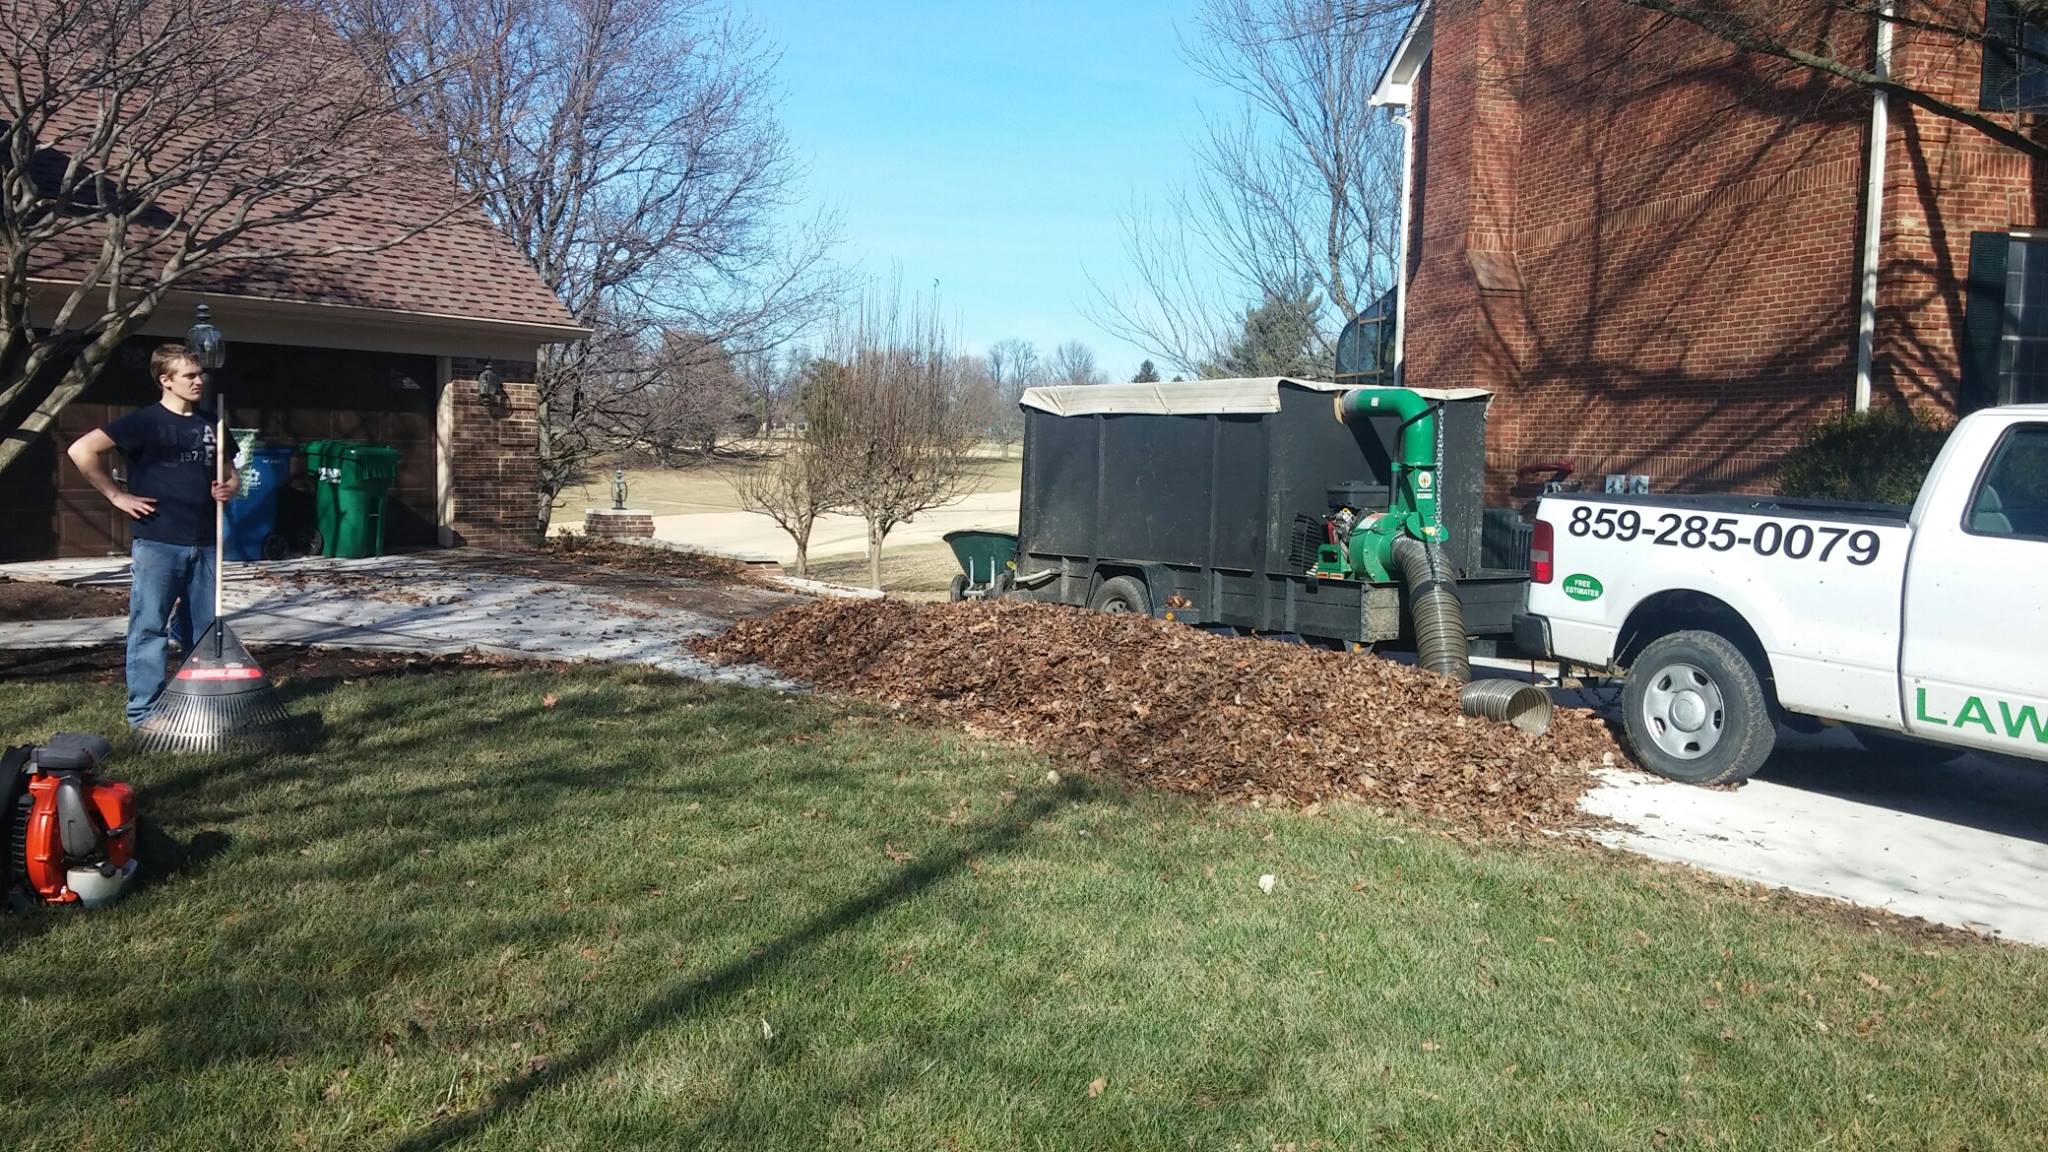 What Landscaping Services Do They Offer? And What Landscaping Tasks Are They Able To Help With?